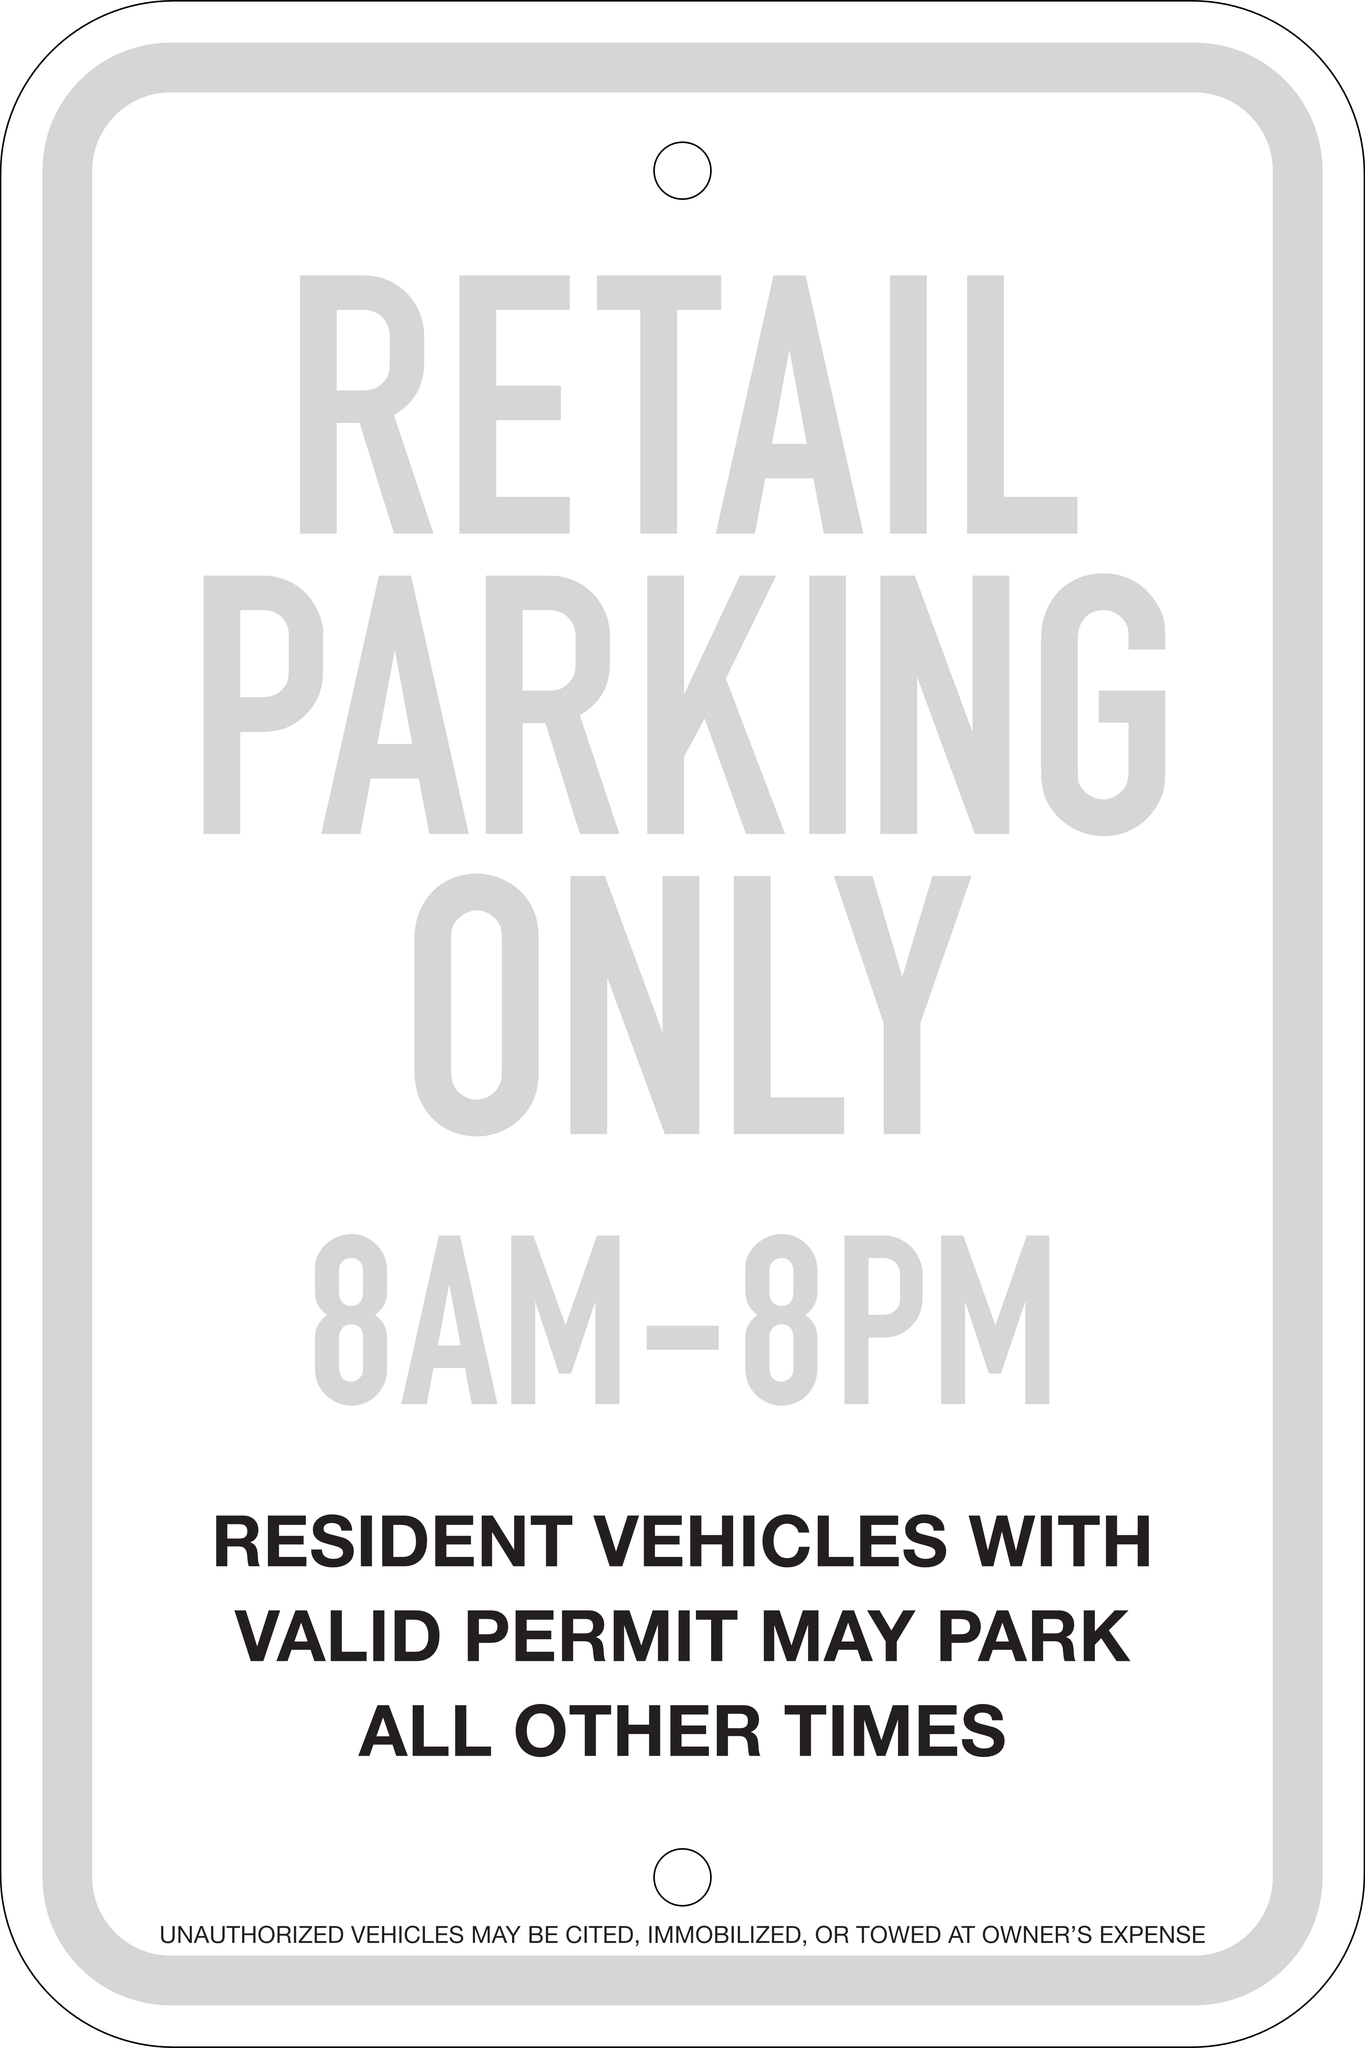 Mixed Use Retail/Resident Parking Sign, 12X18